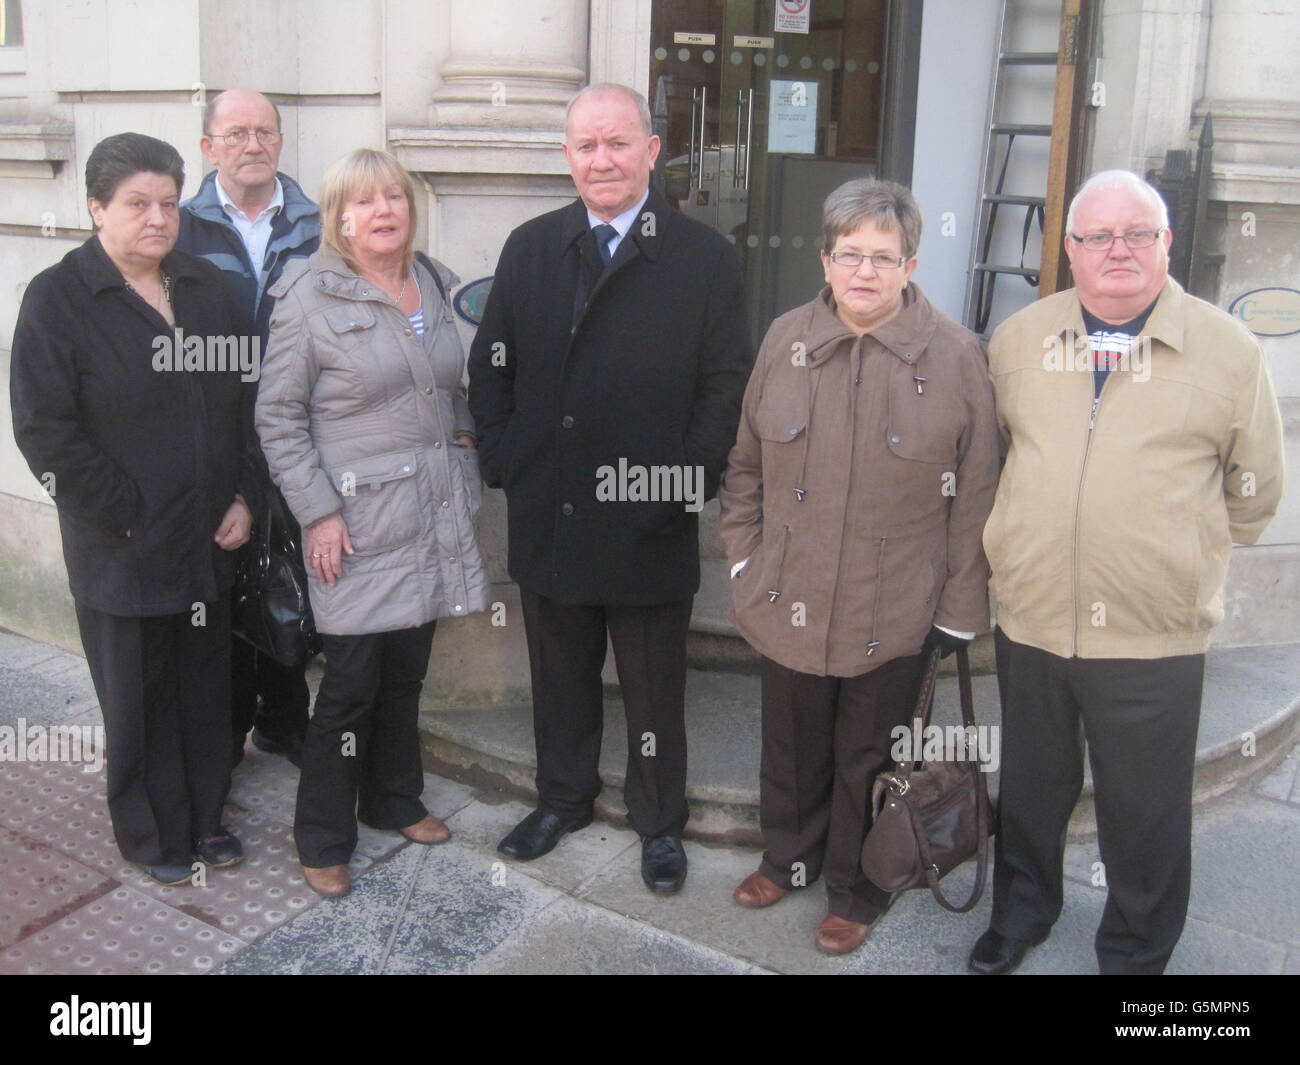 David Heasley with other family memeber (names not given) outside Mays chambers coroner's court in Belfast this morning, as a coroner has told the family of a pensioner who died after an assault that he is powerless to address their concerns about the prosecution of his killer. Stock Photo